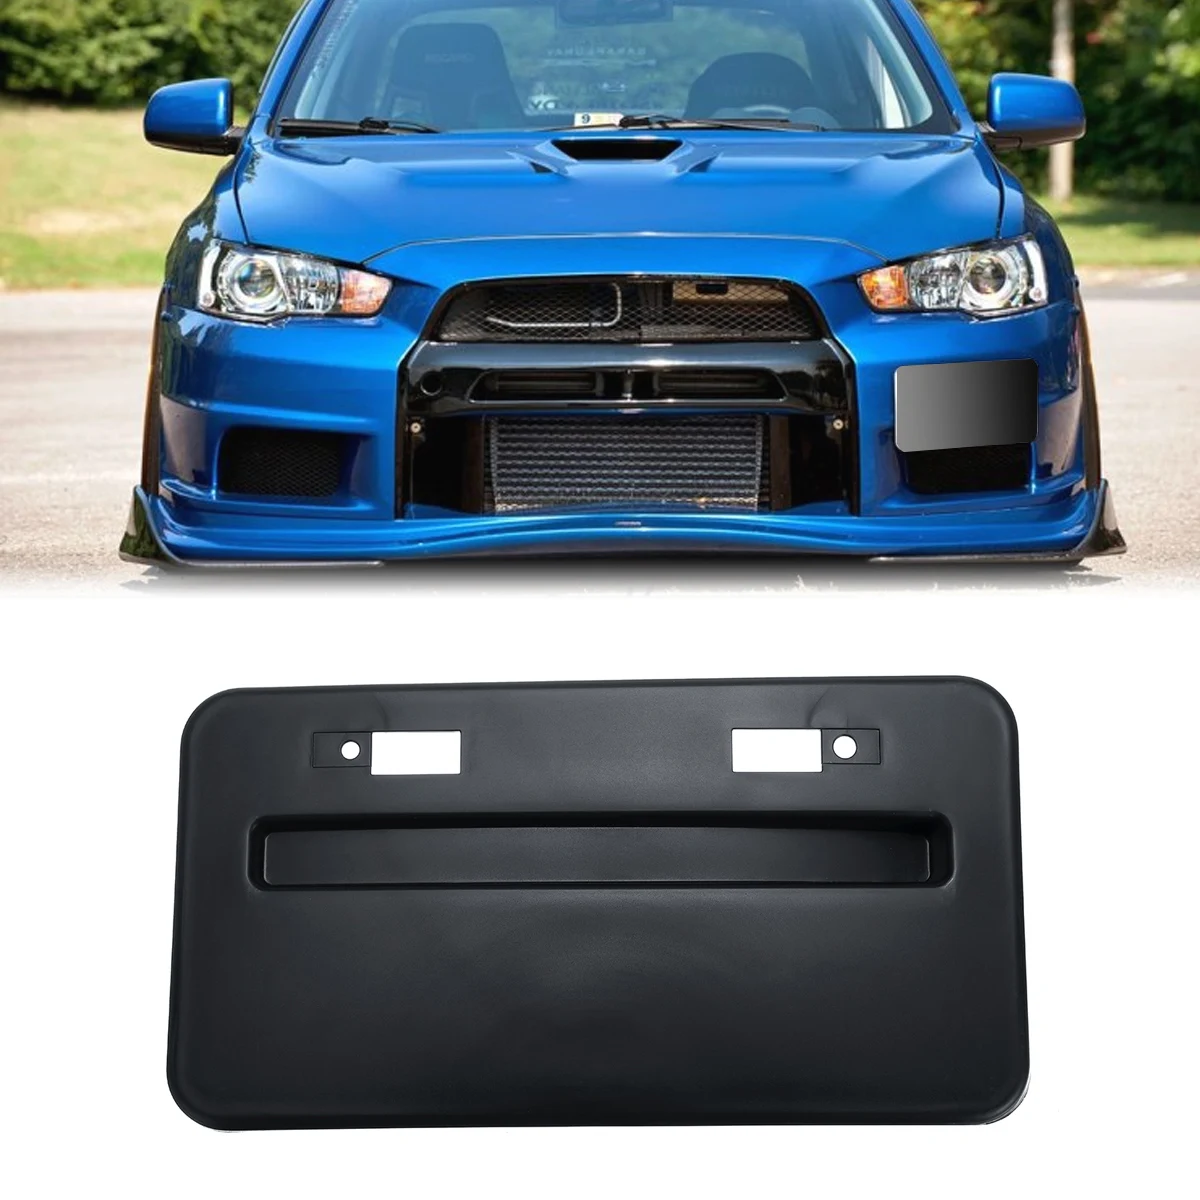 Cuztom Tuning Front Bumper Side Mount License Plate Relocator Base Compatible with 2008-2016 Mitsubishi Lancer GTS EVO X 